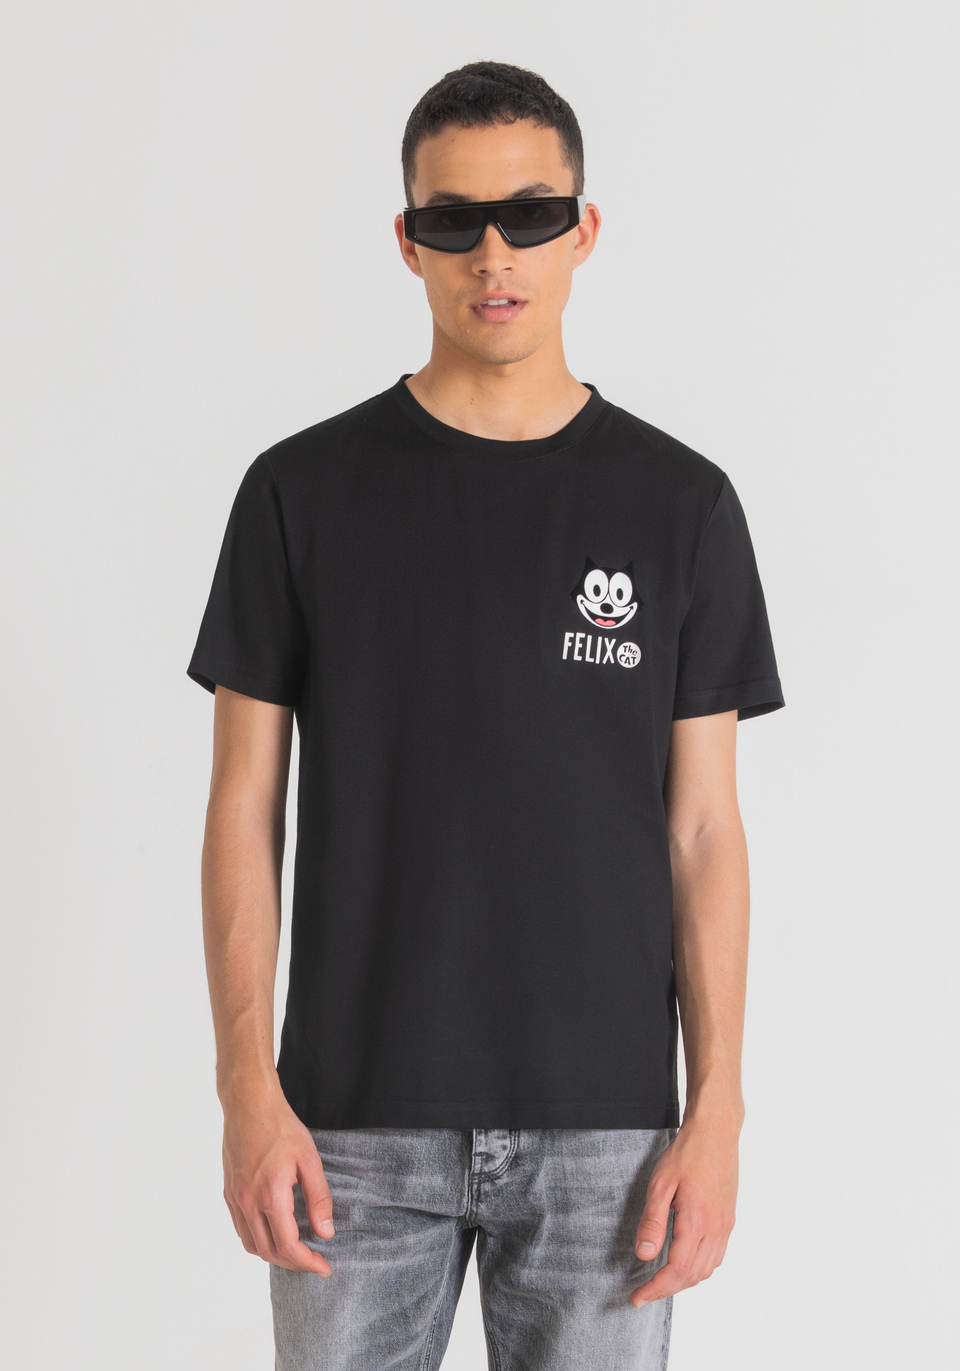 REGULAR-FIT T-SHIRT IN PURE COTTON WITH FELIX THE CAT PRINT - Antony Morato Online Shop